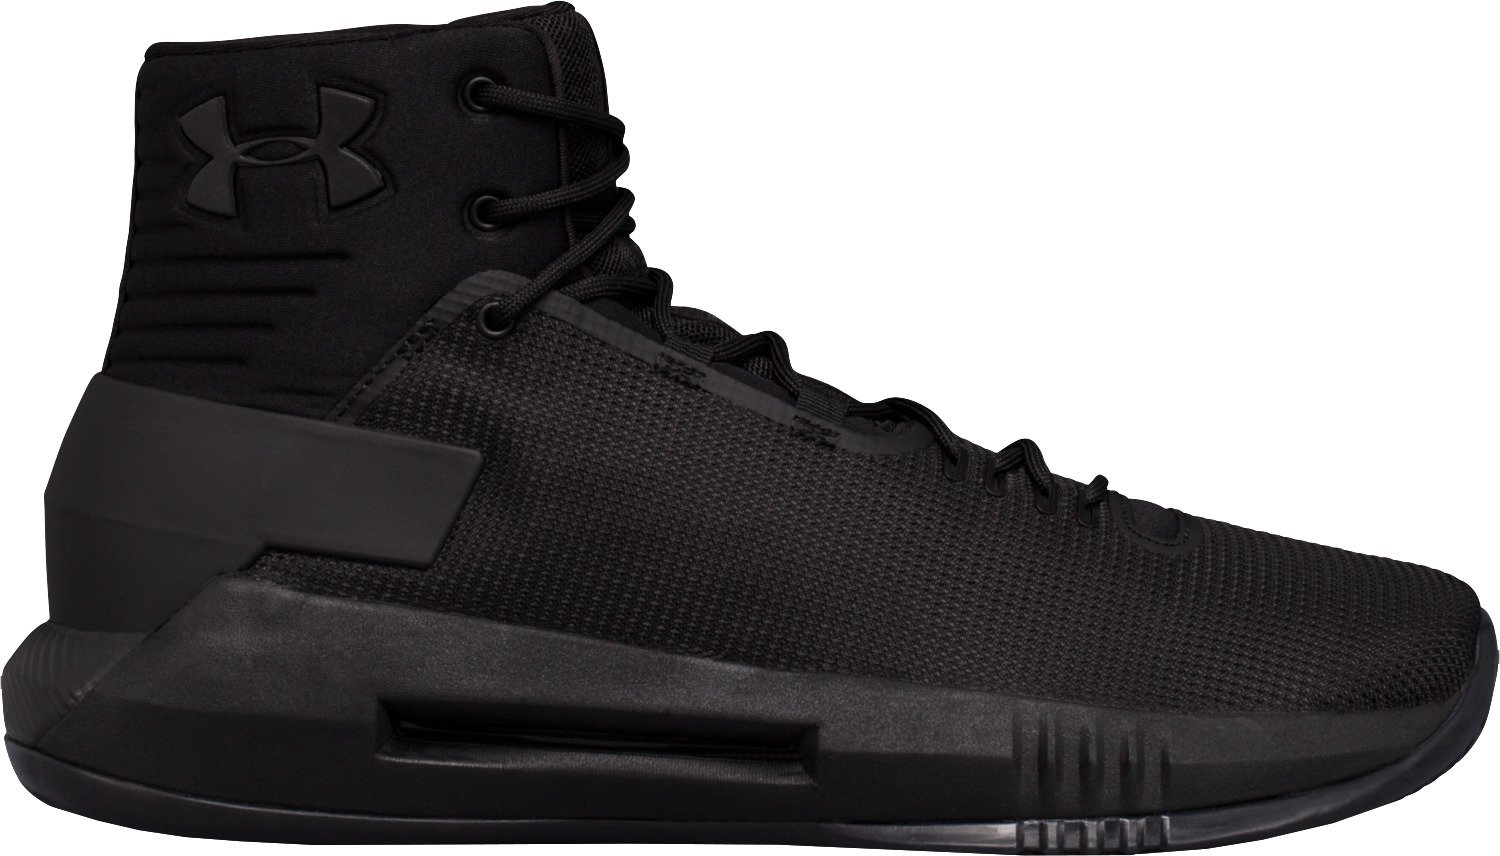 all black under armor shoes